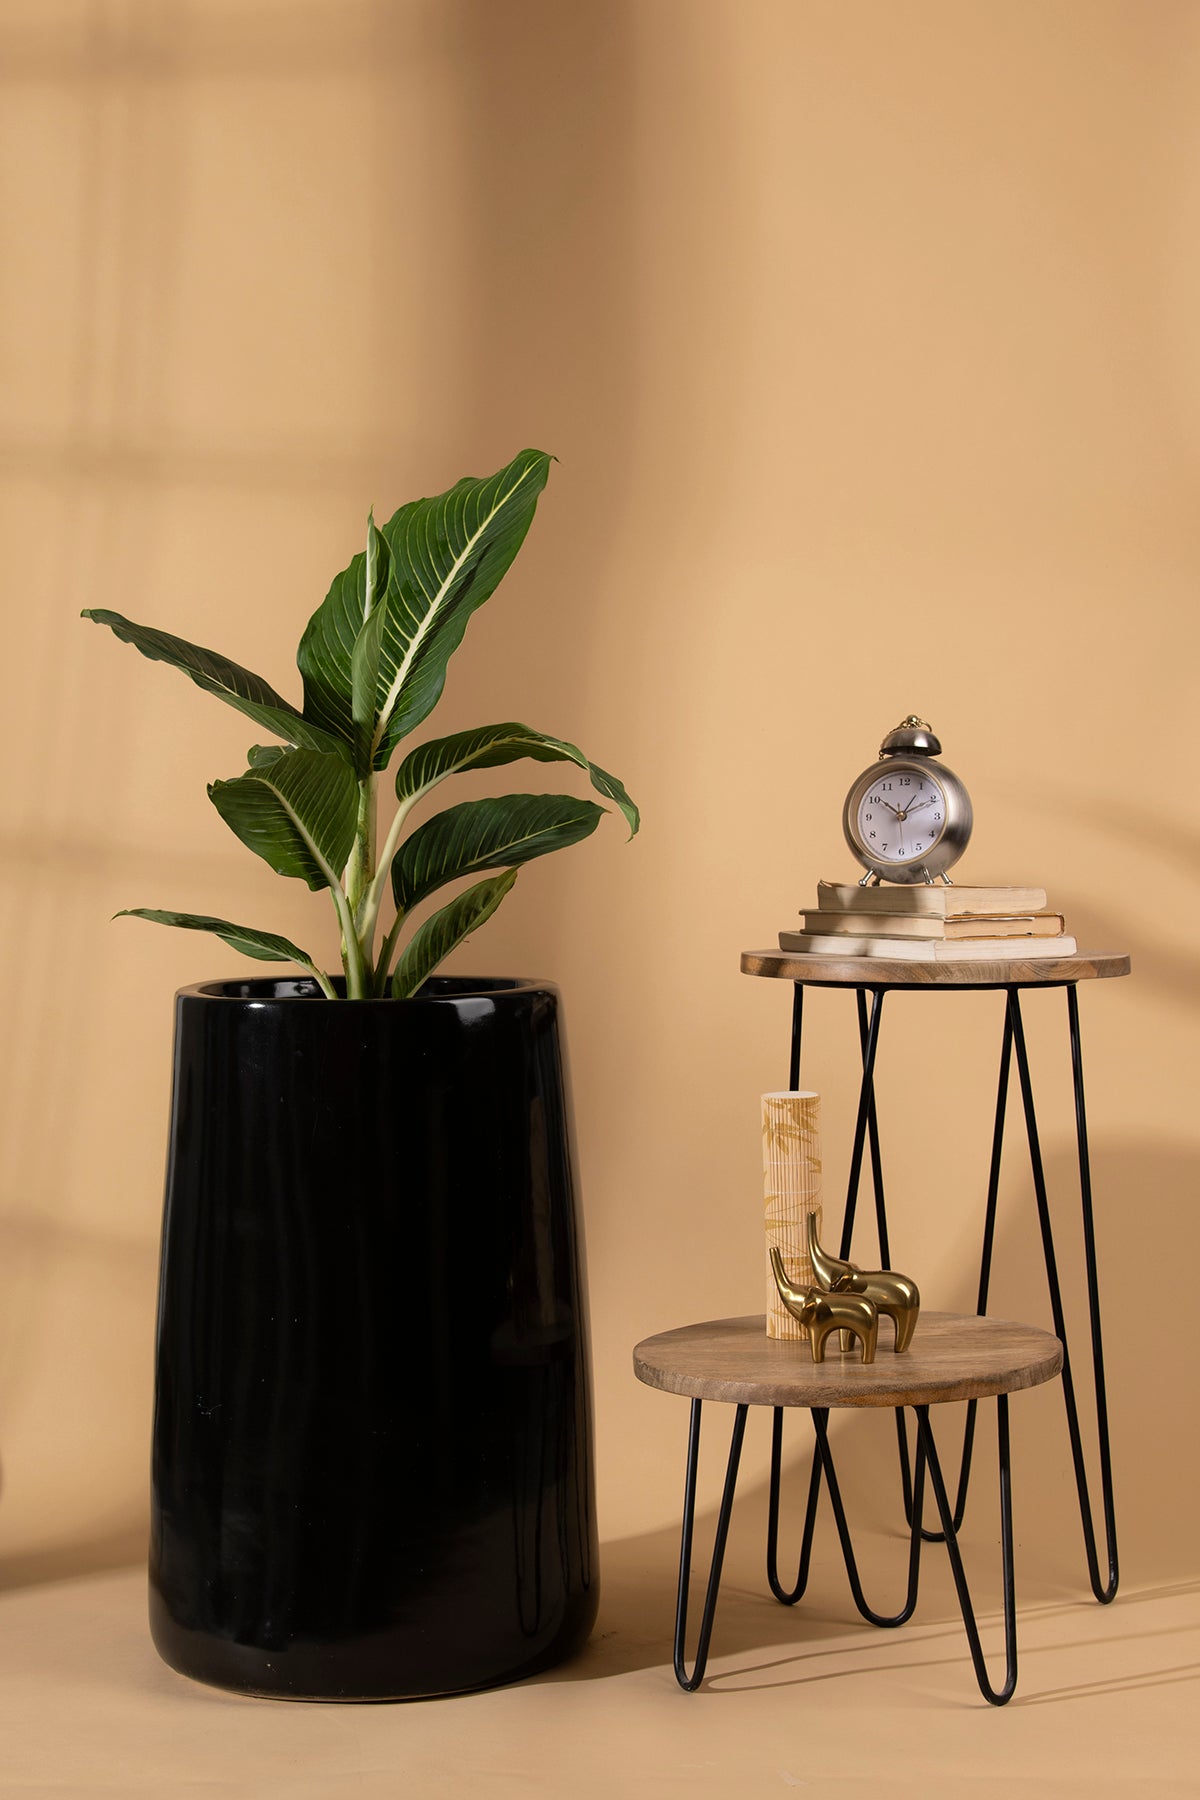 Tall size Misplaced Metaphor Ceramic Planter in Black color with Dieffenbachia plant